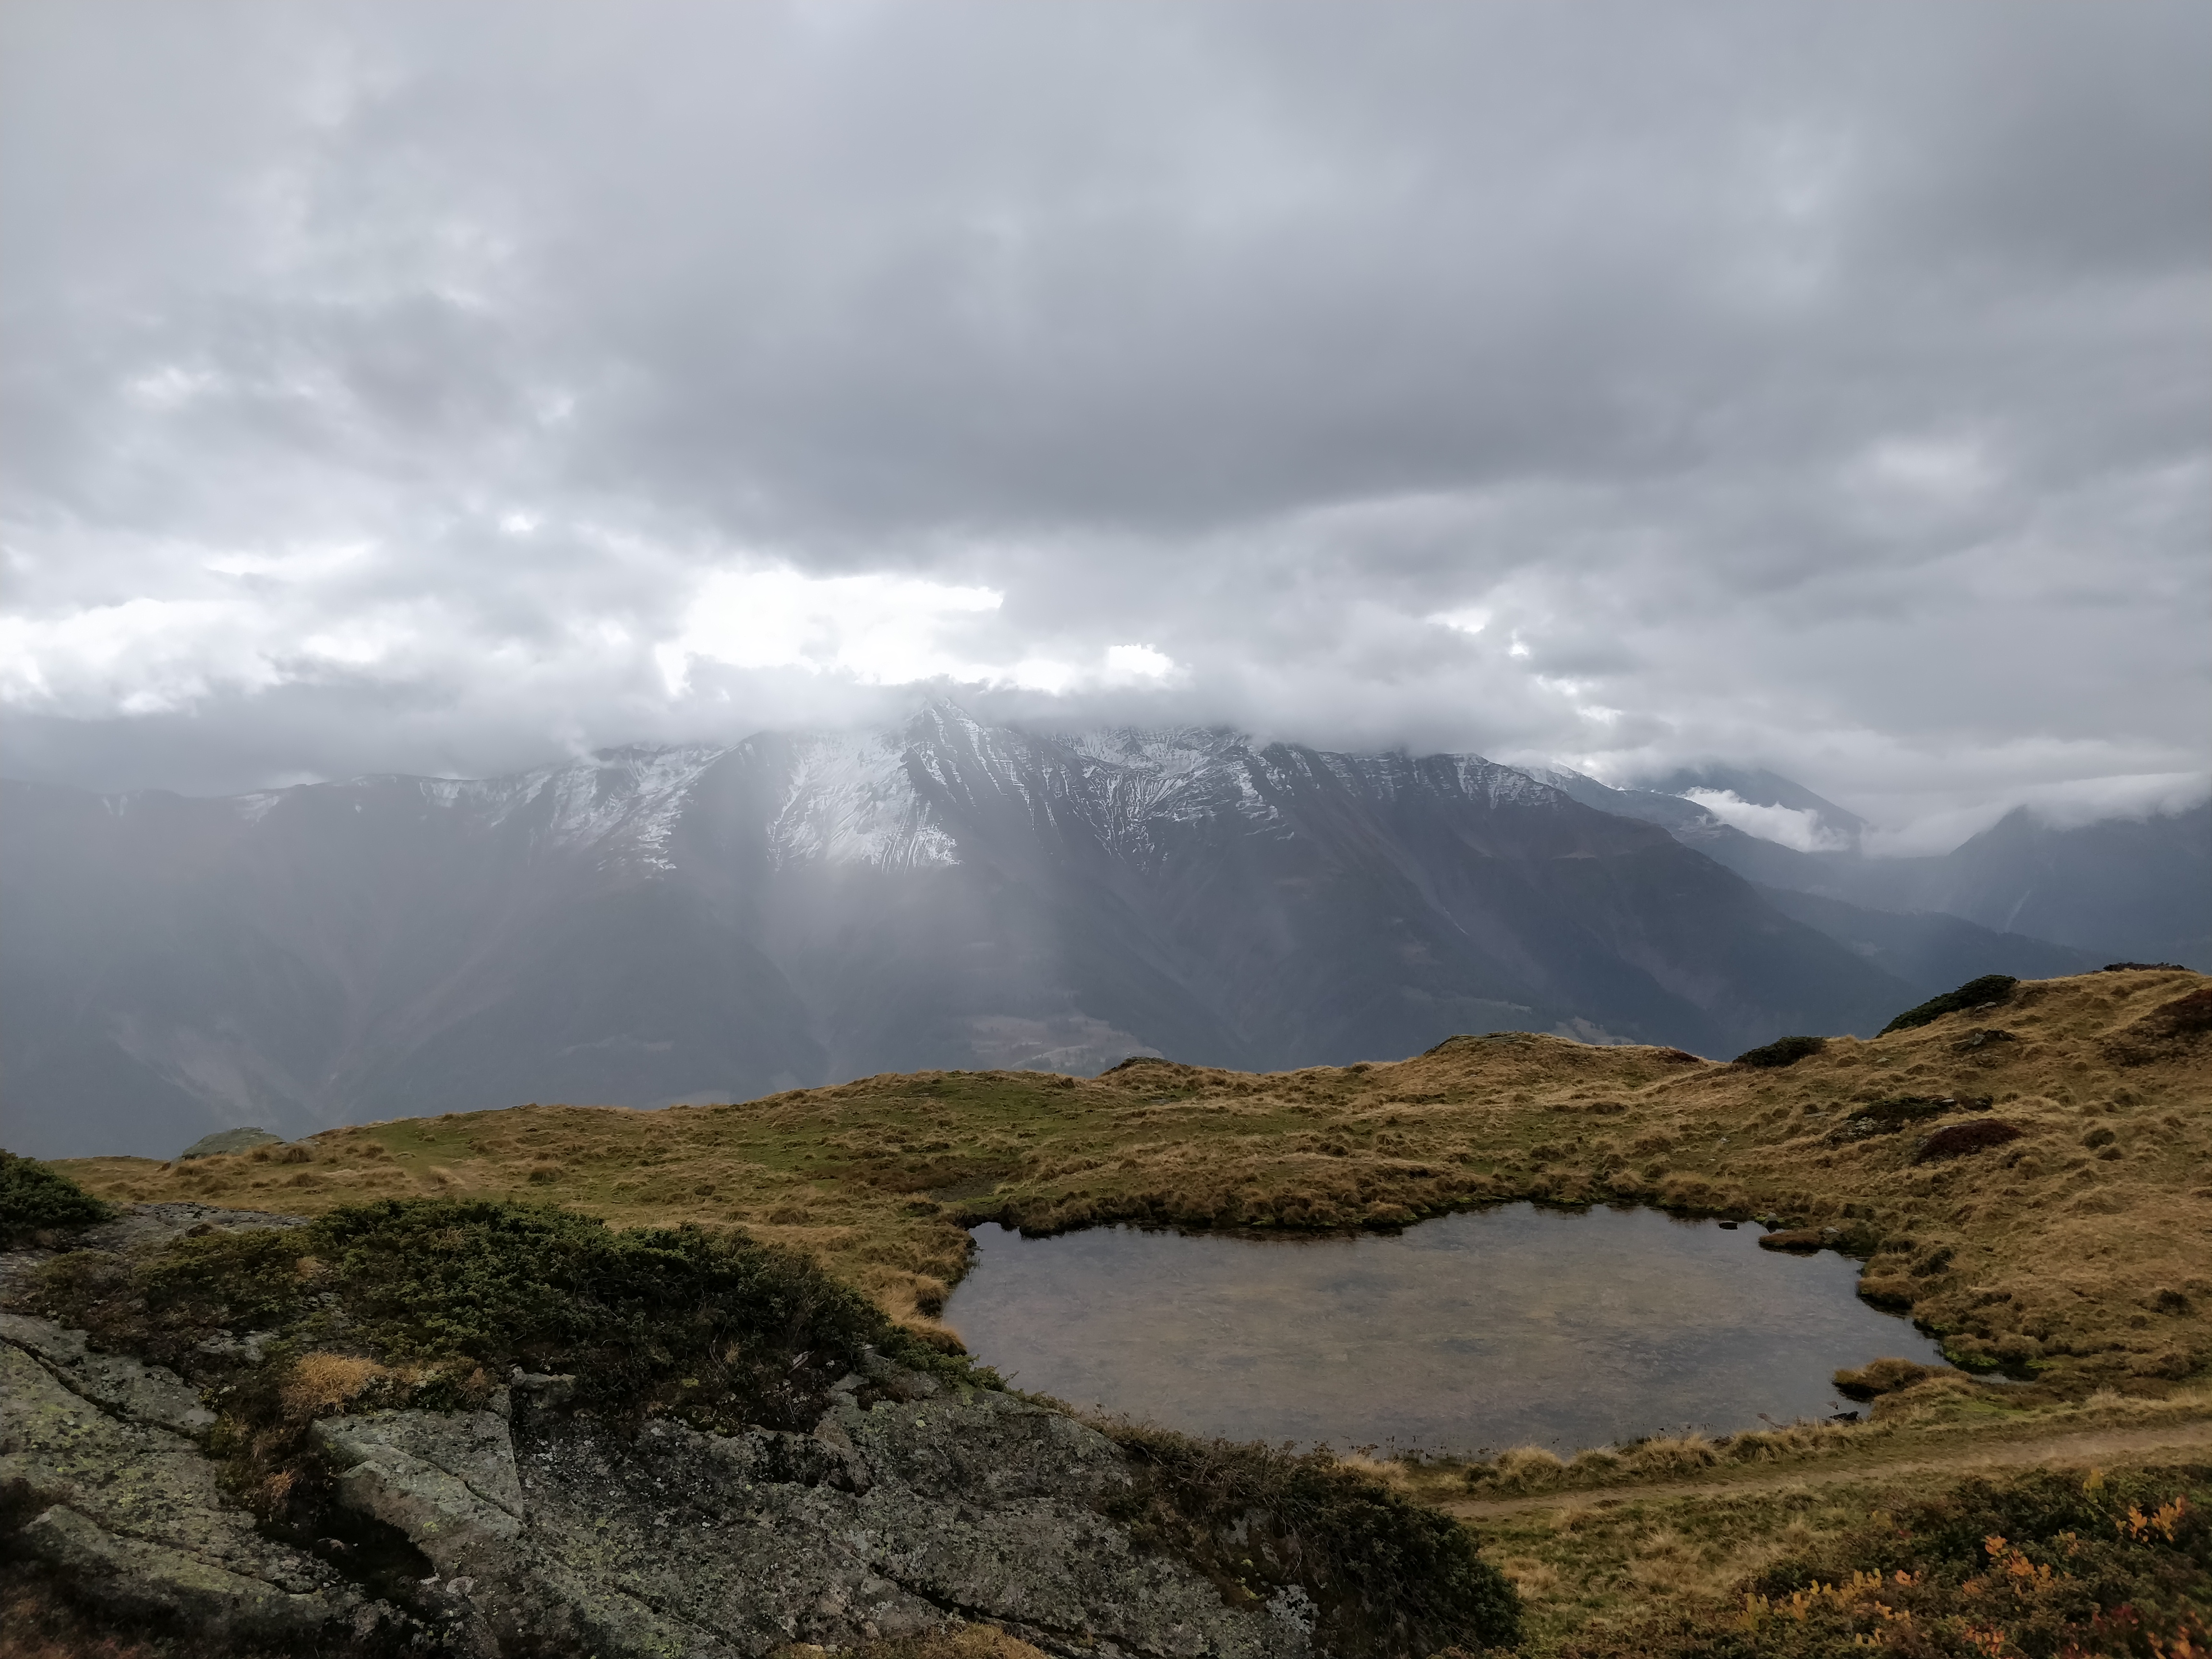 Cloudy mountain view with a peaty pond.